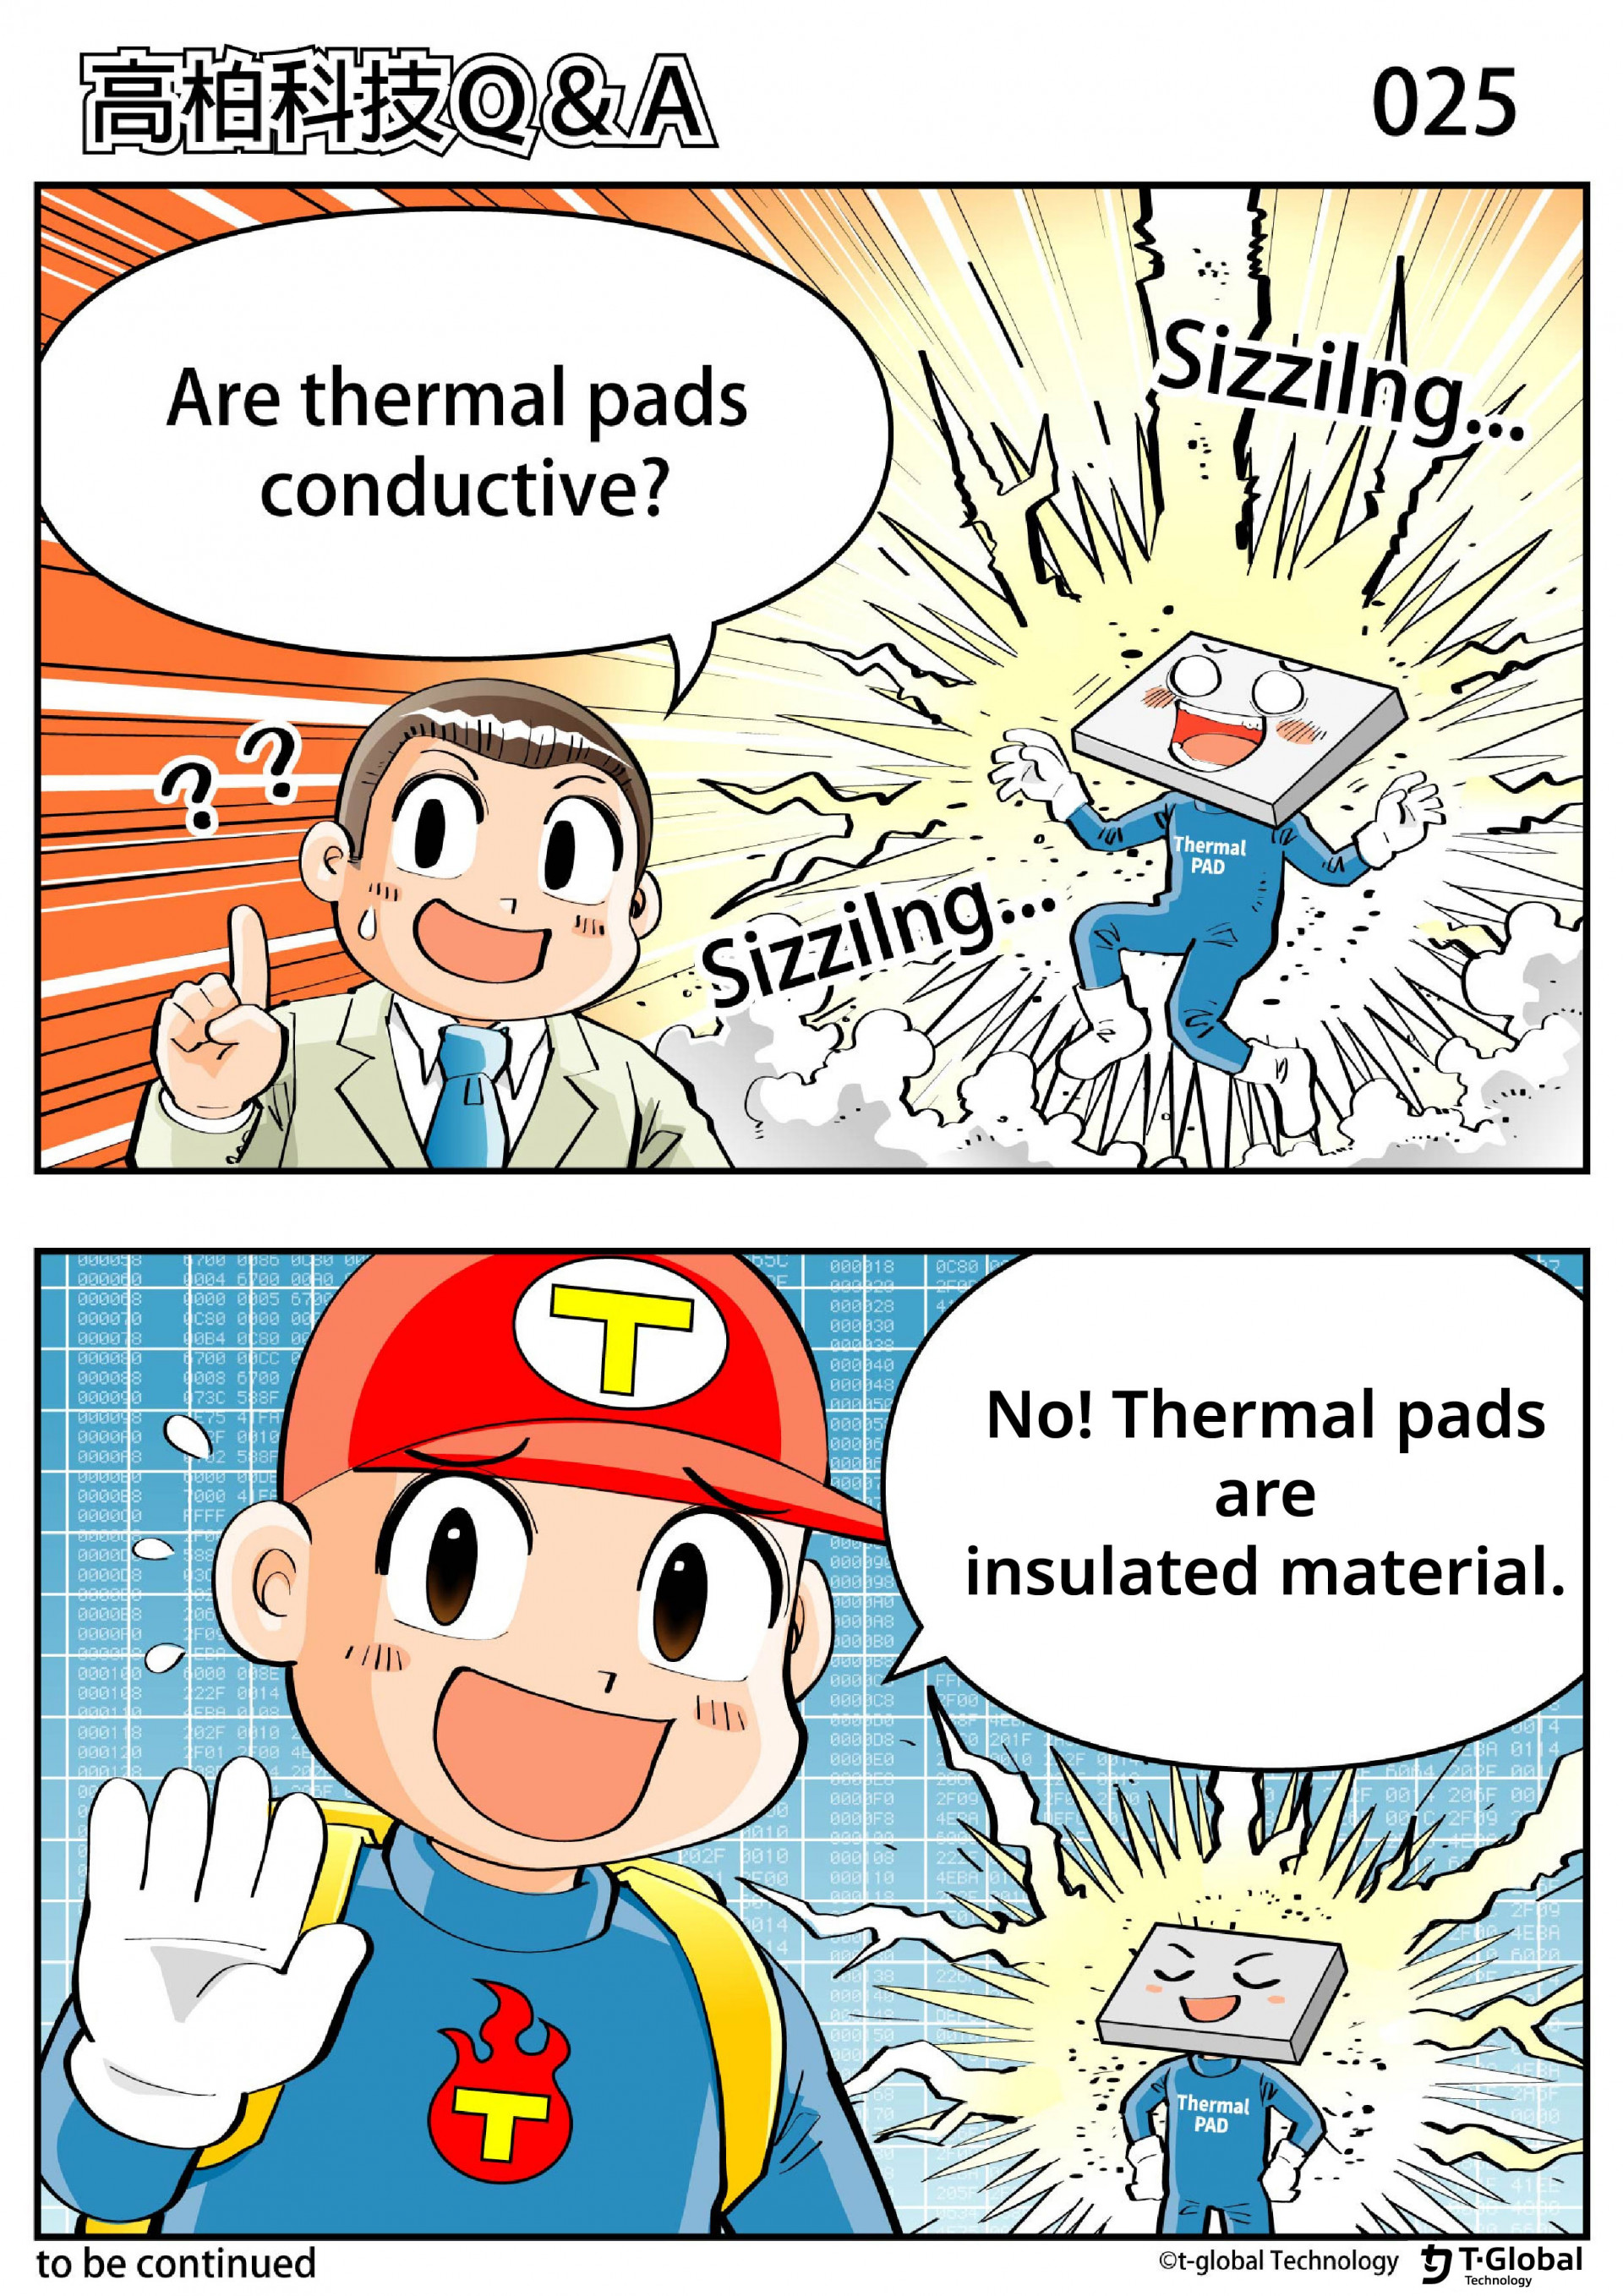 Are thermal pads conductive?